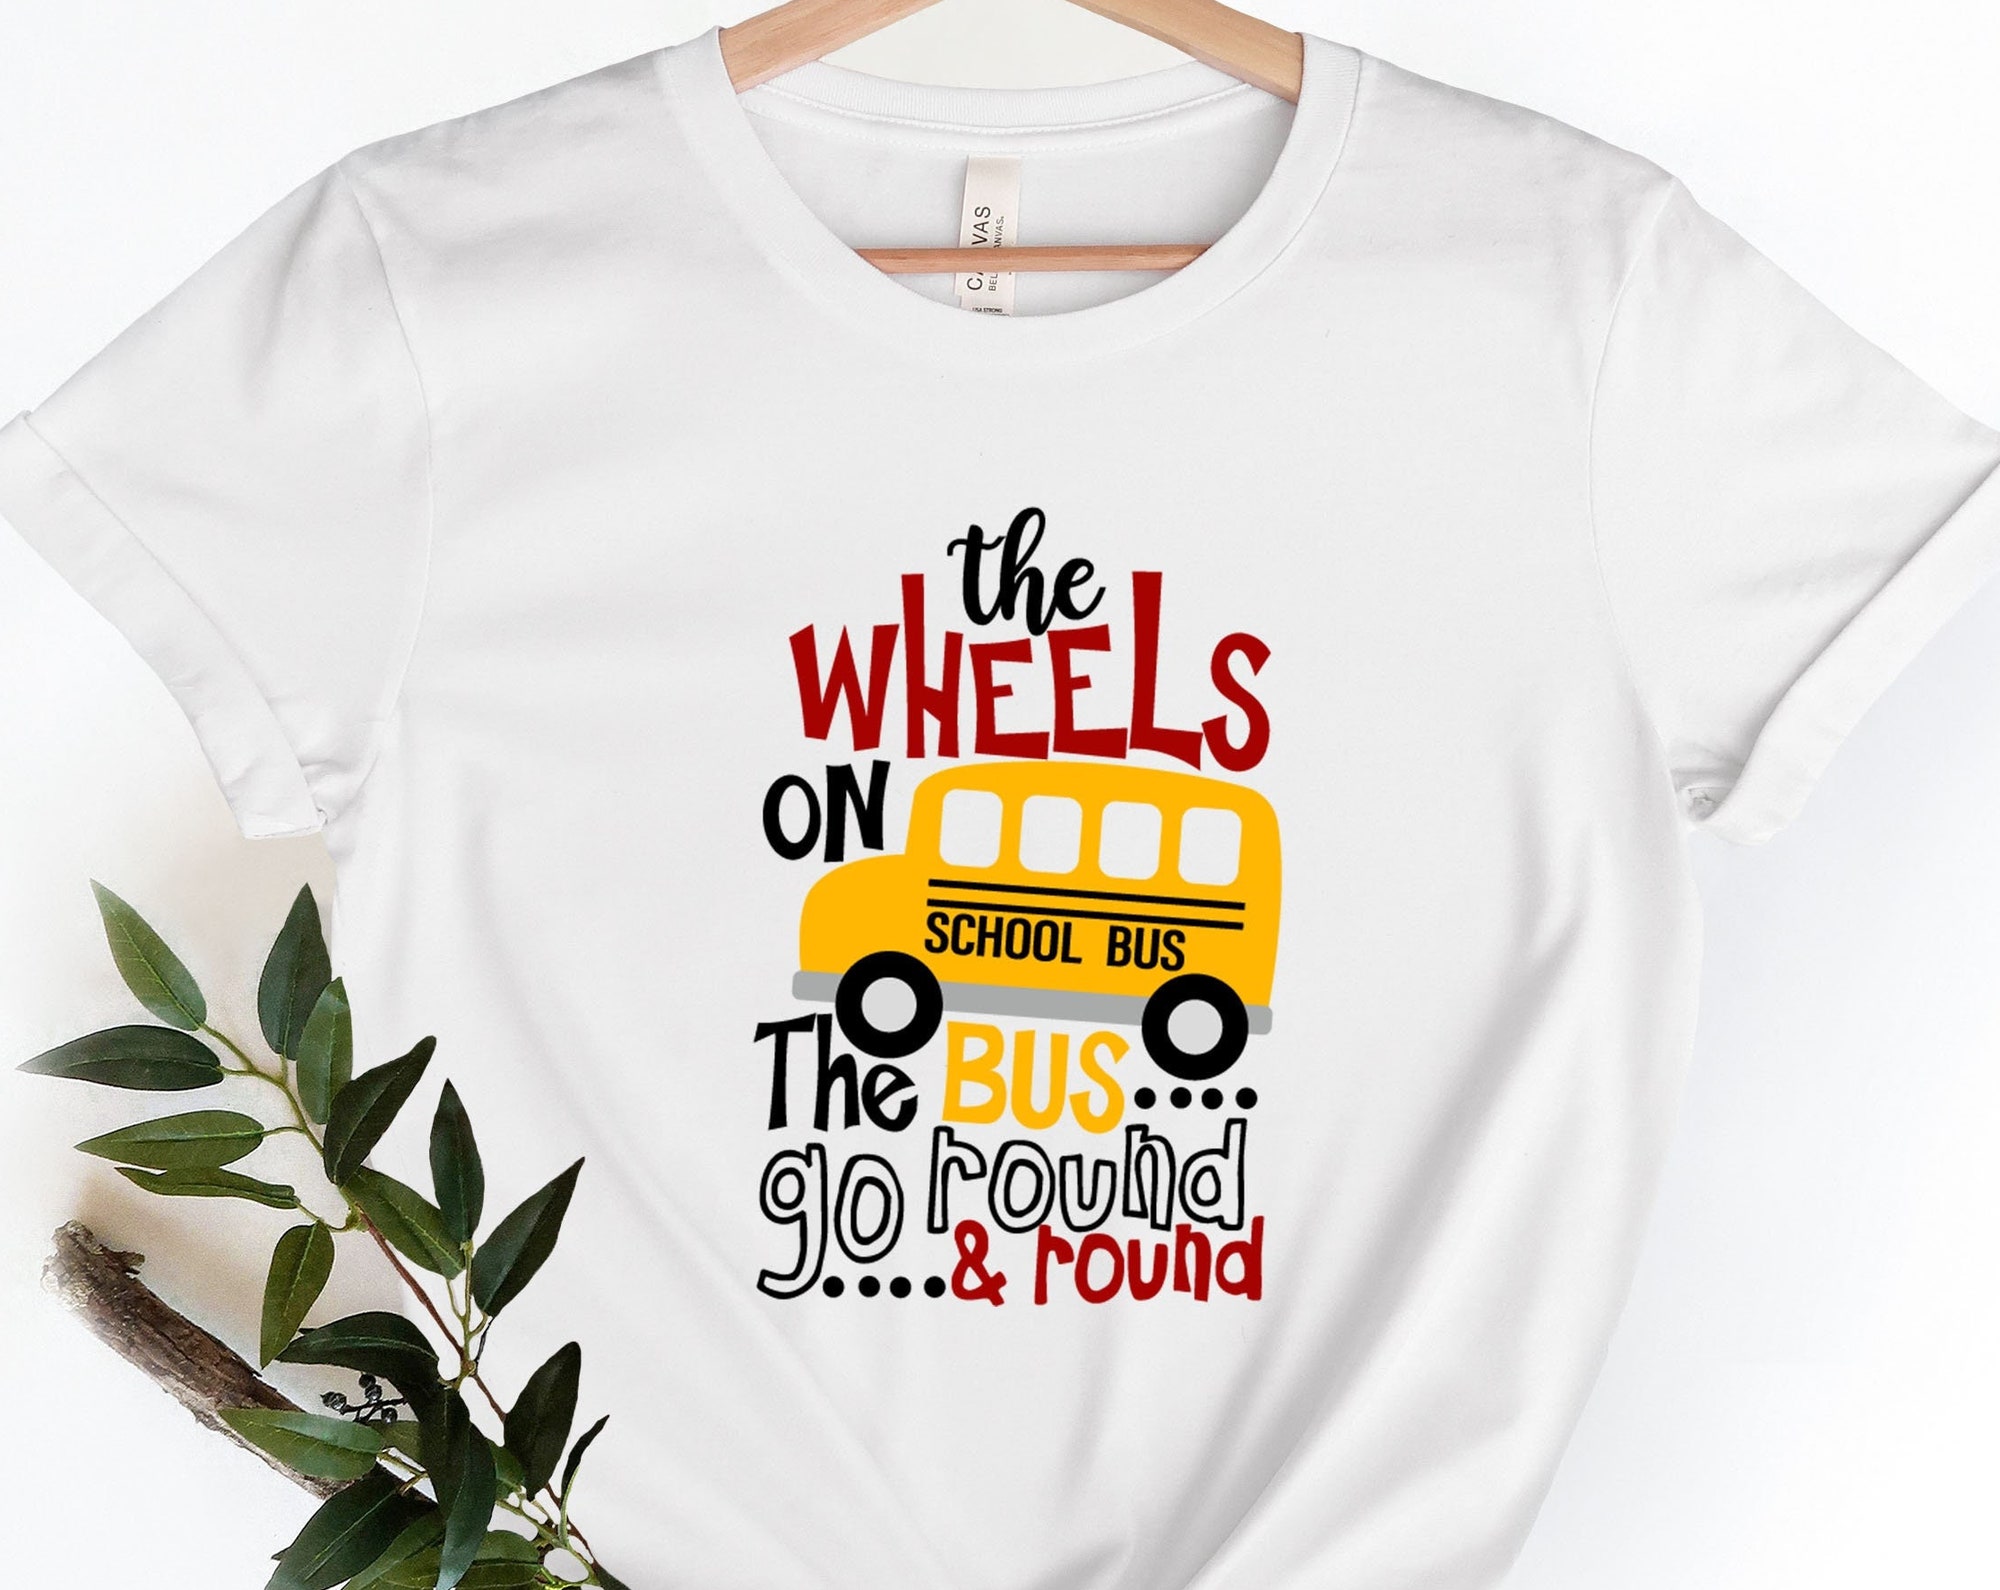 Discover The WHEELS On The BUS shirt, go back to school shirt,School bus shirt, school kids shirt